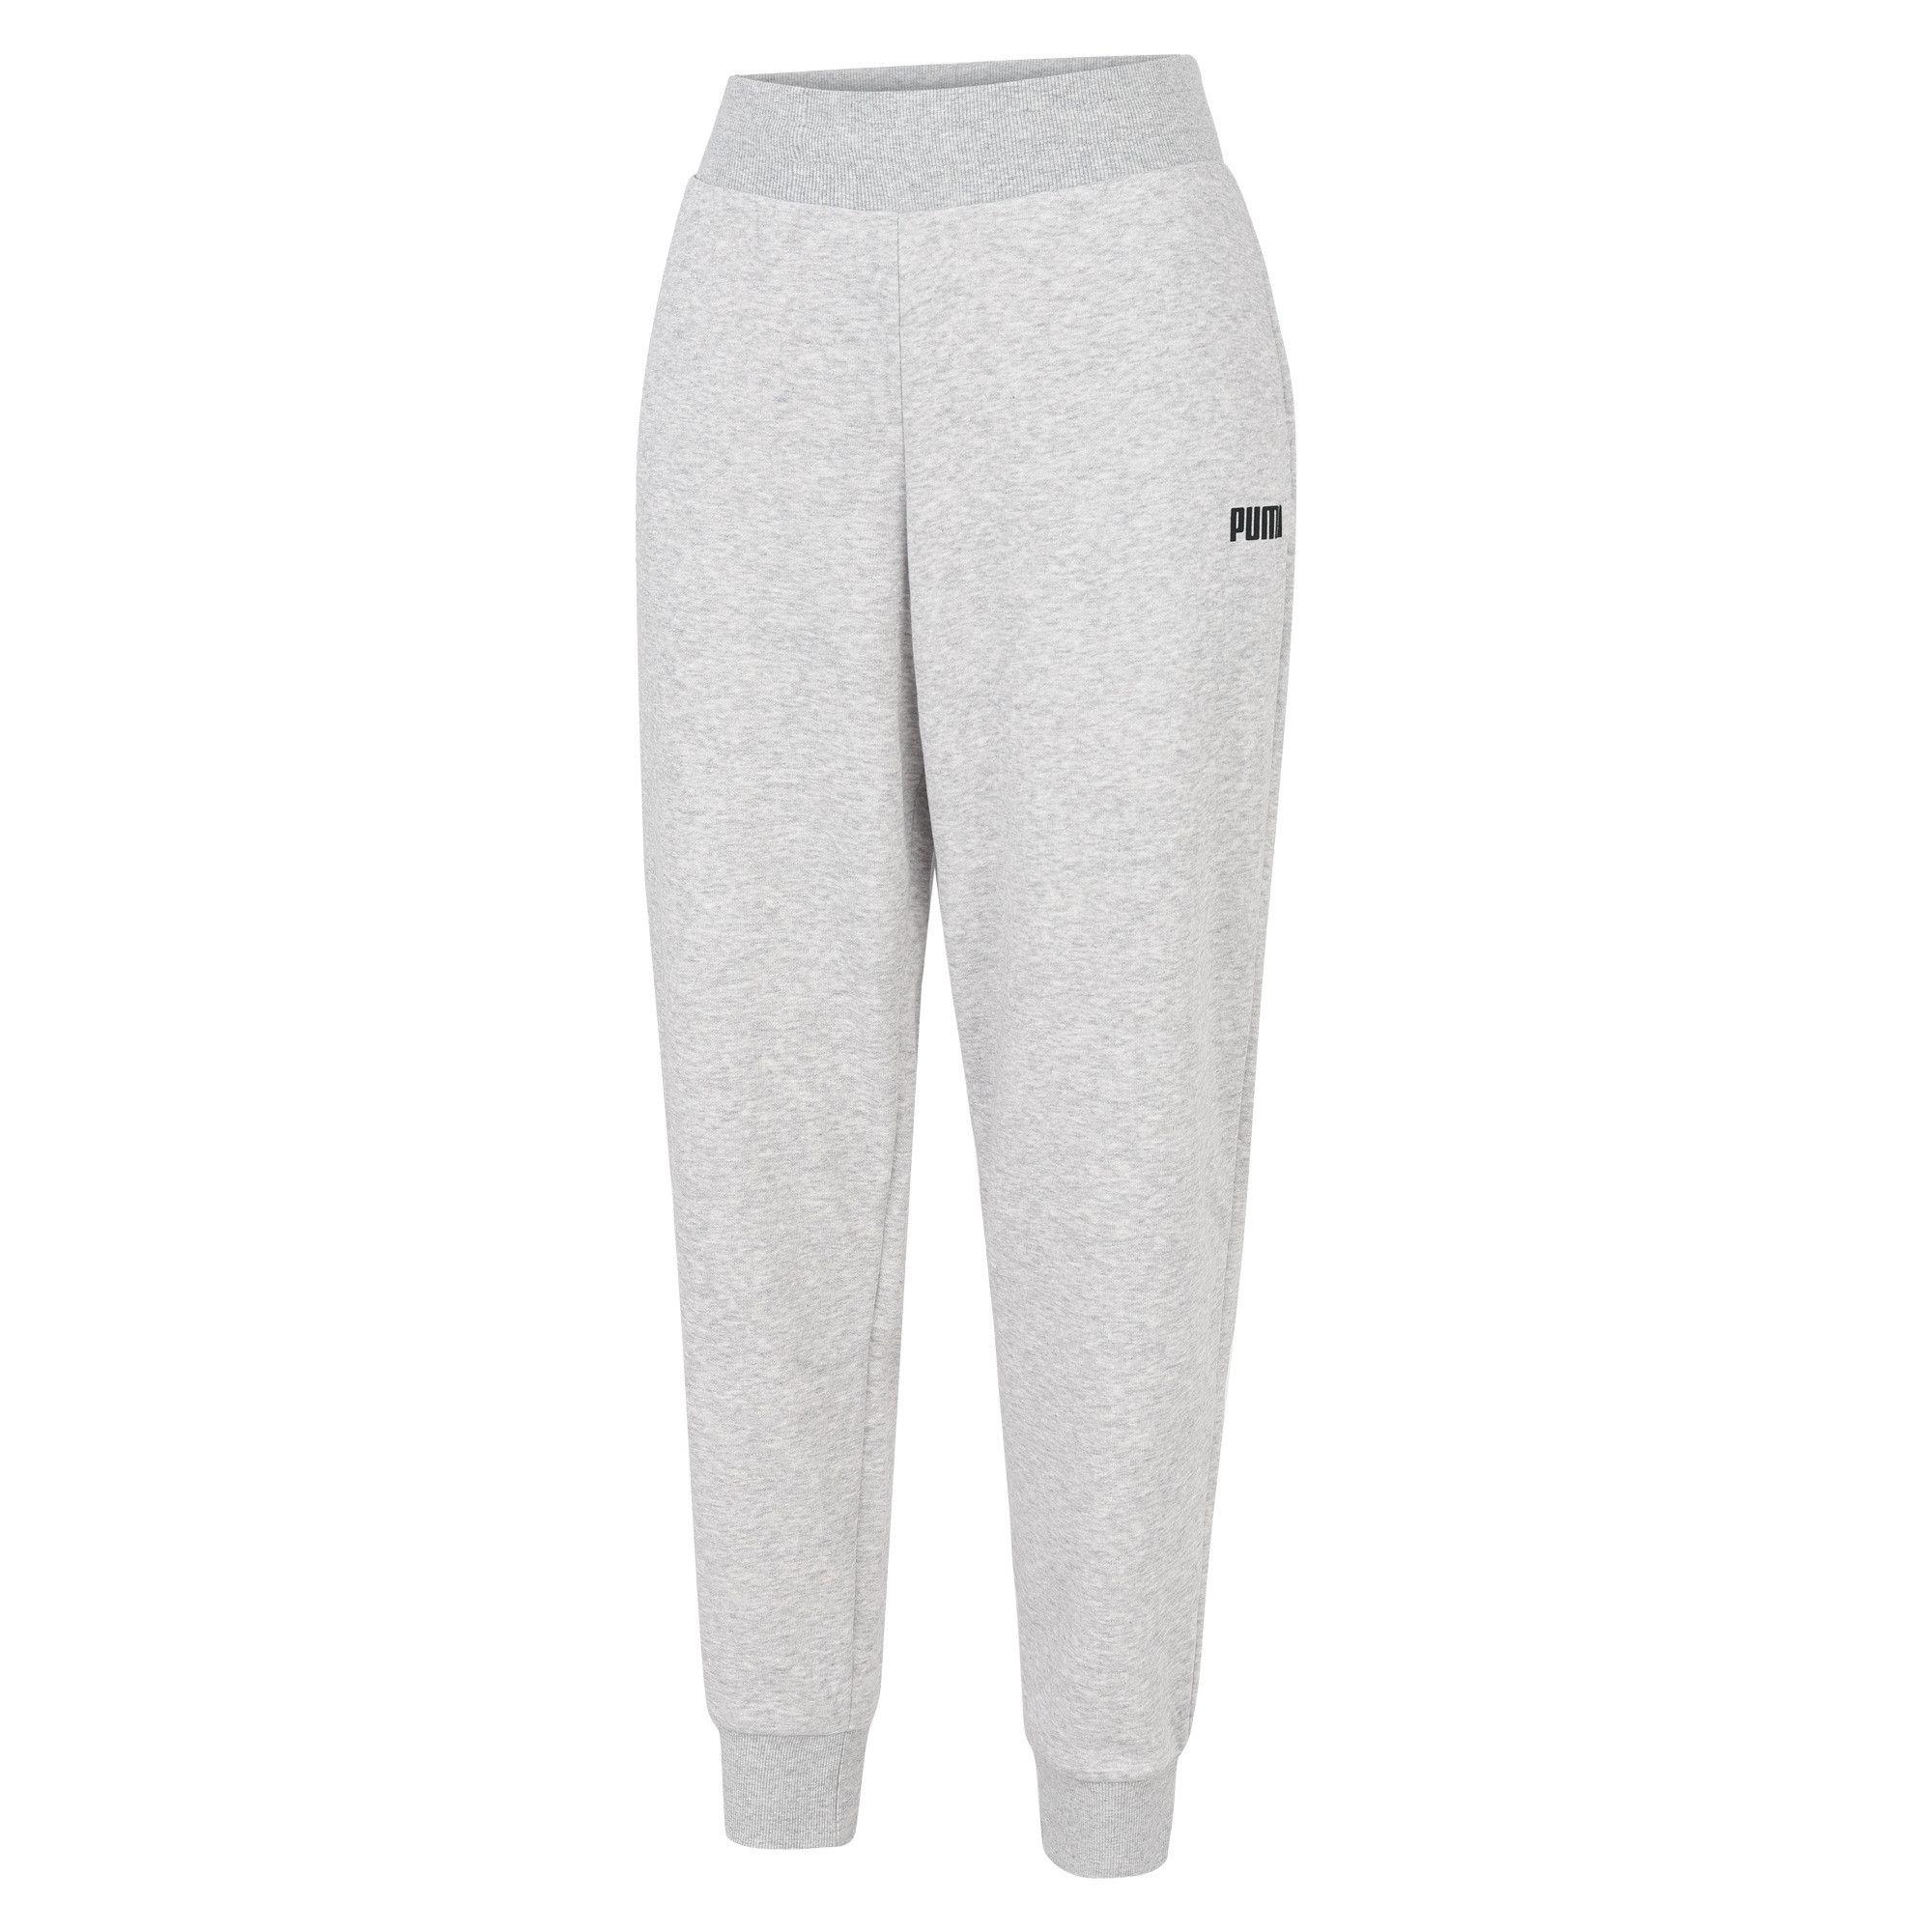 Designed for comfort, as you'd expect, these full-length sweatpants are going to fast become your go-to weekend wear – or weekday, if you're working from home. Taken from our Essentials Collection, they have plenty of room to move around, making them equally good for hanging out at home as they are for running errands on a Saturday.